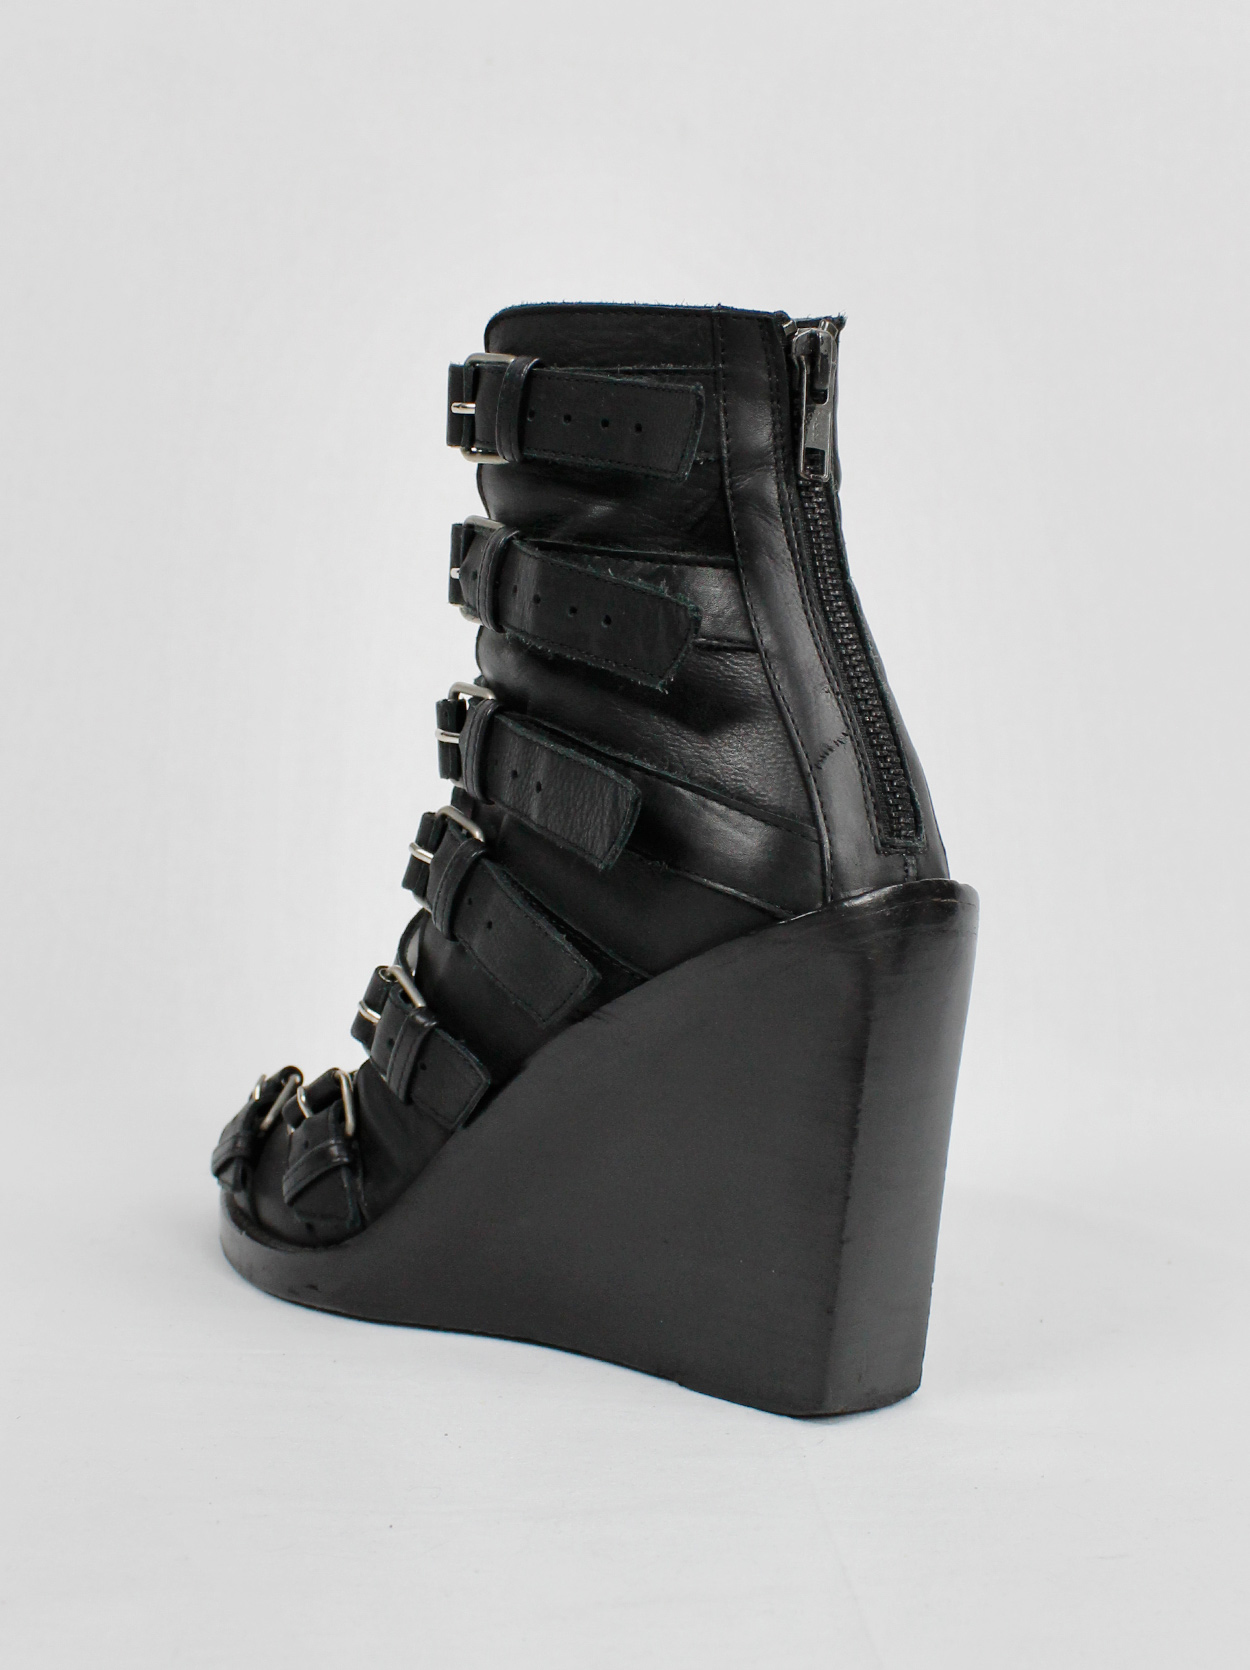 Ann Demeulemeester Blanche black wedge sandals with buckle belts (39 ...